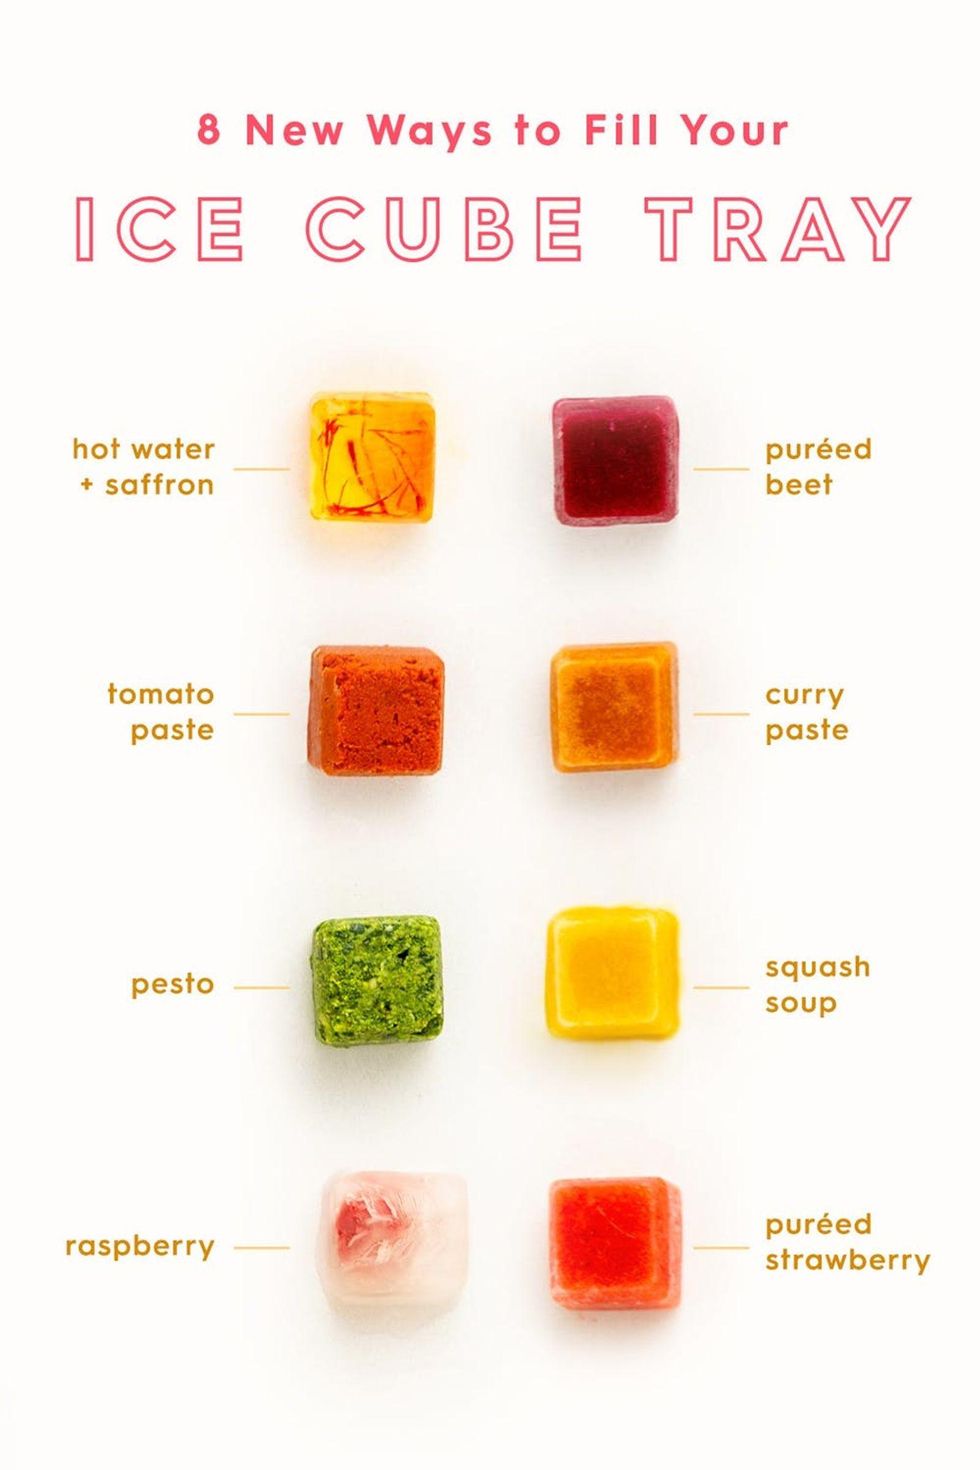 options for putting in your ice cube tray